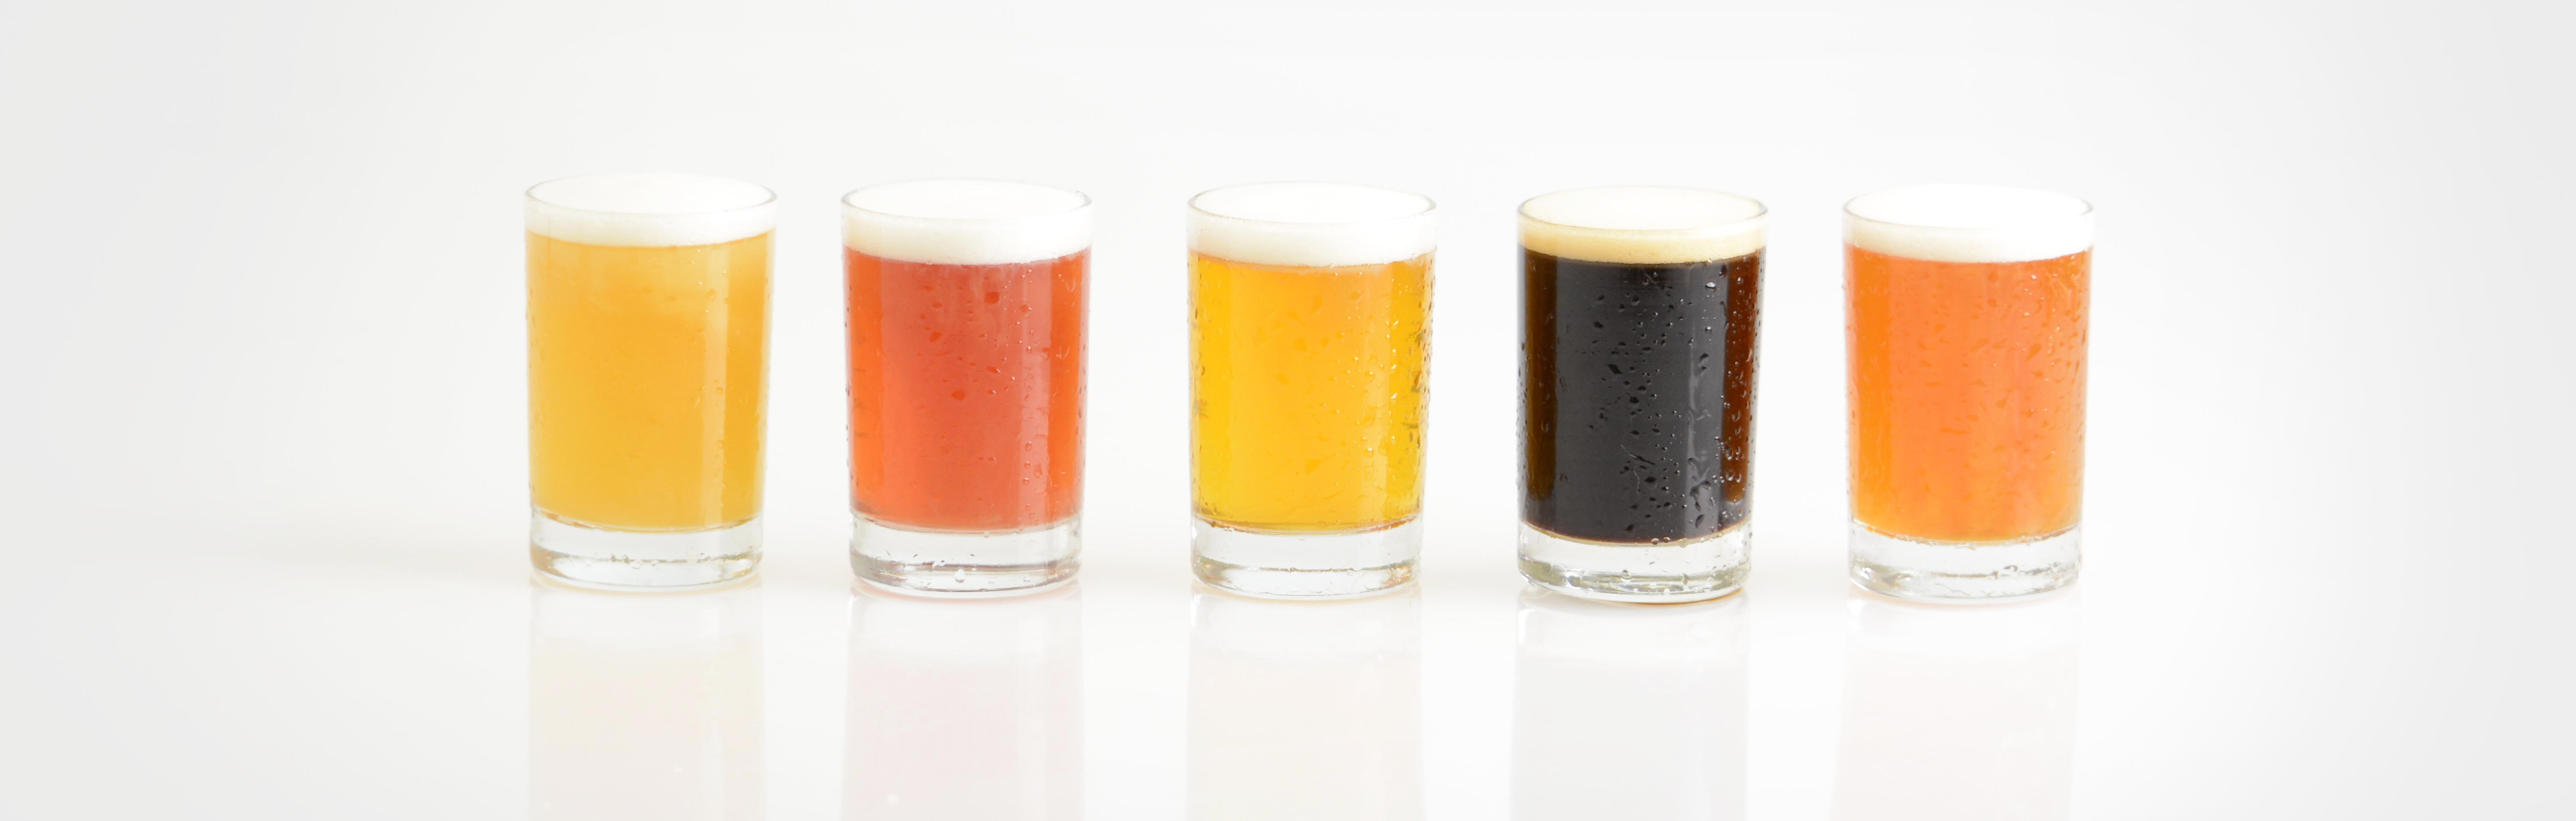 Assortment of different colored beers